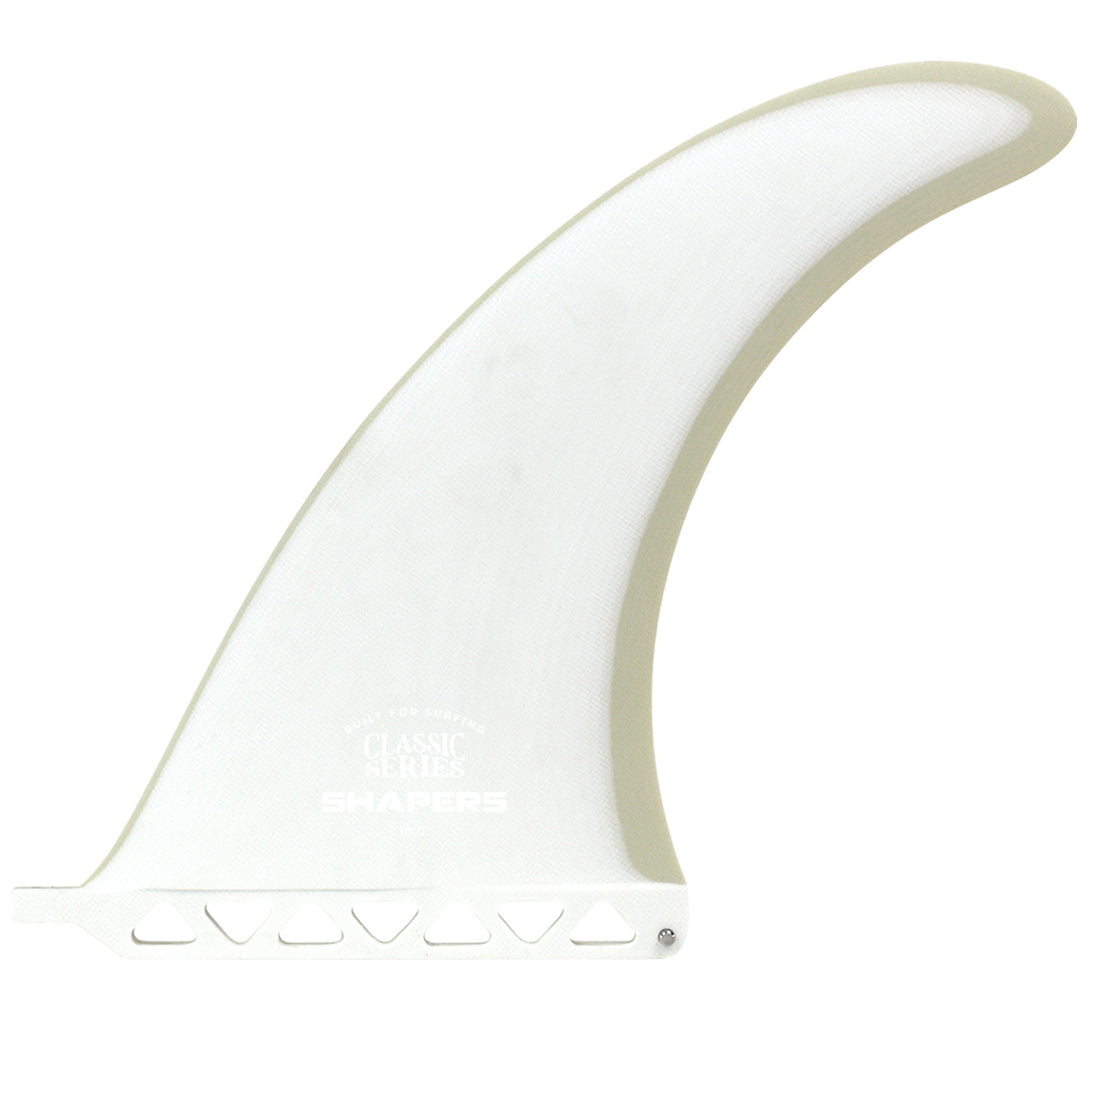 Shapers Fins - 10" Classic Series  - Nude White